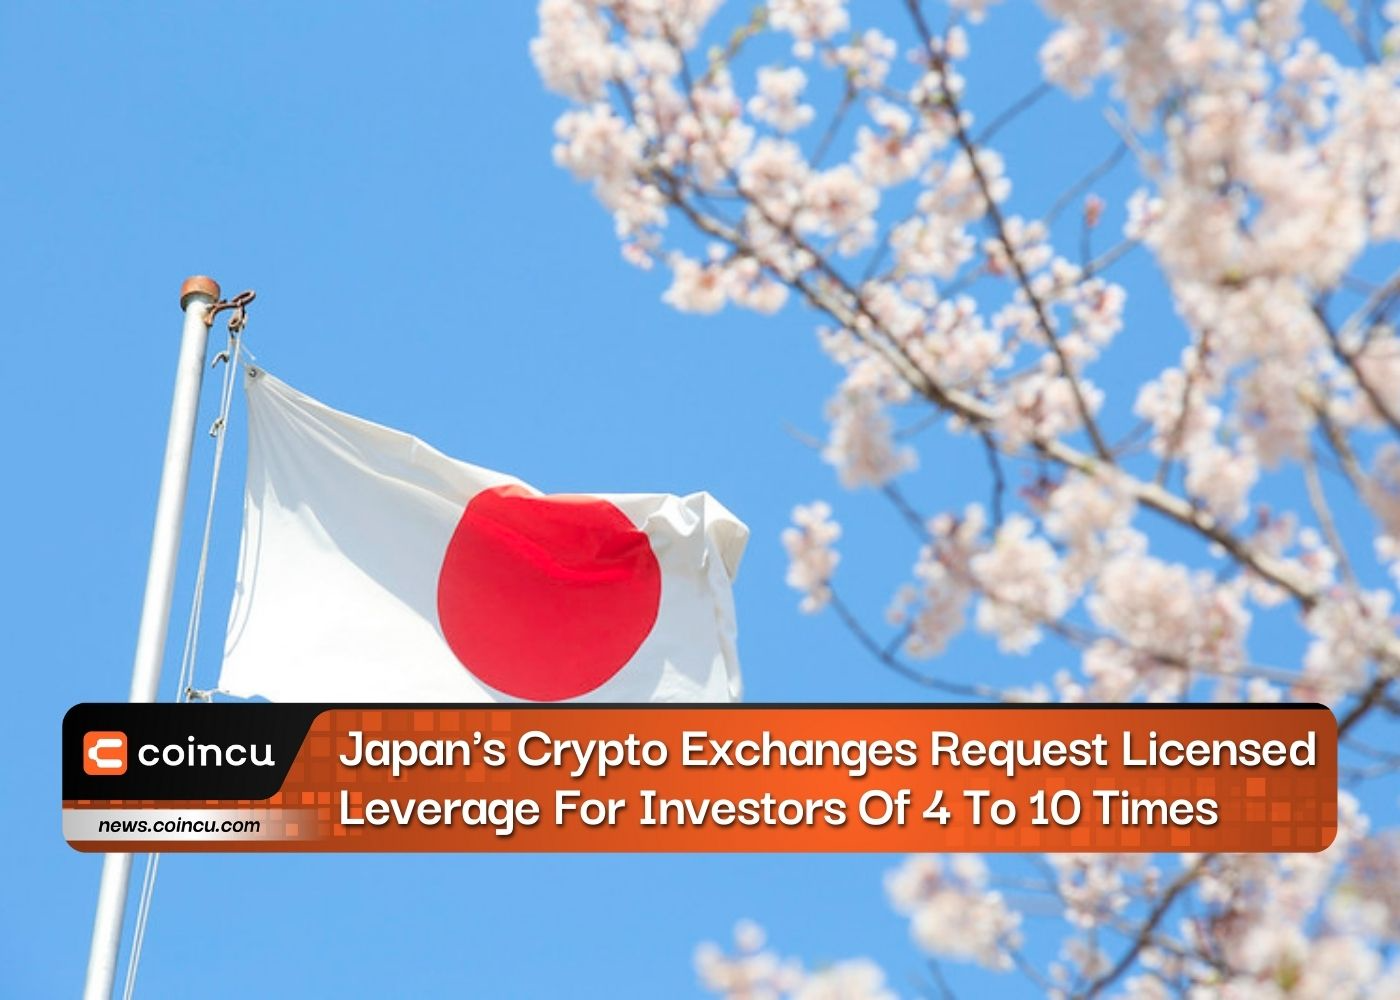 Japan's Crypto Exchanges Request Licensed Leverage For Investors Of 4 To 10 Times